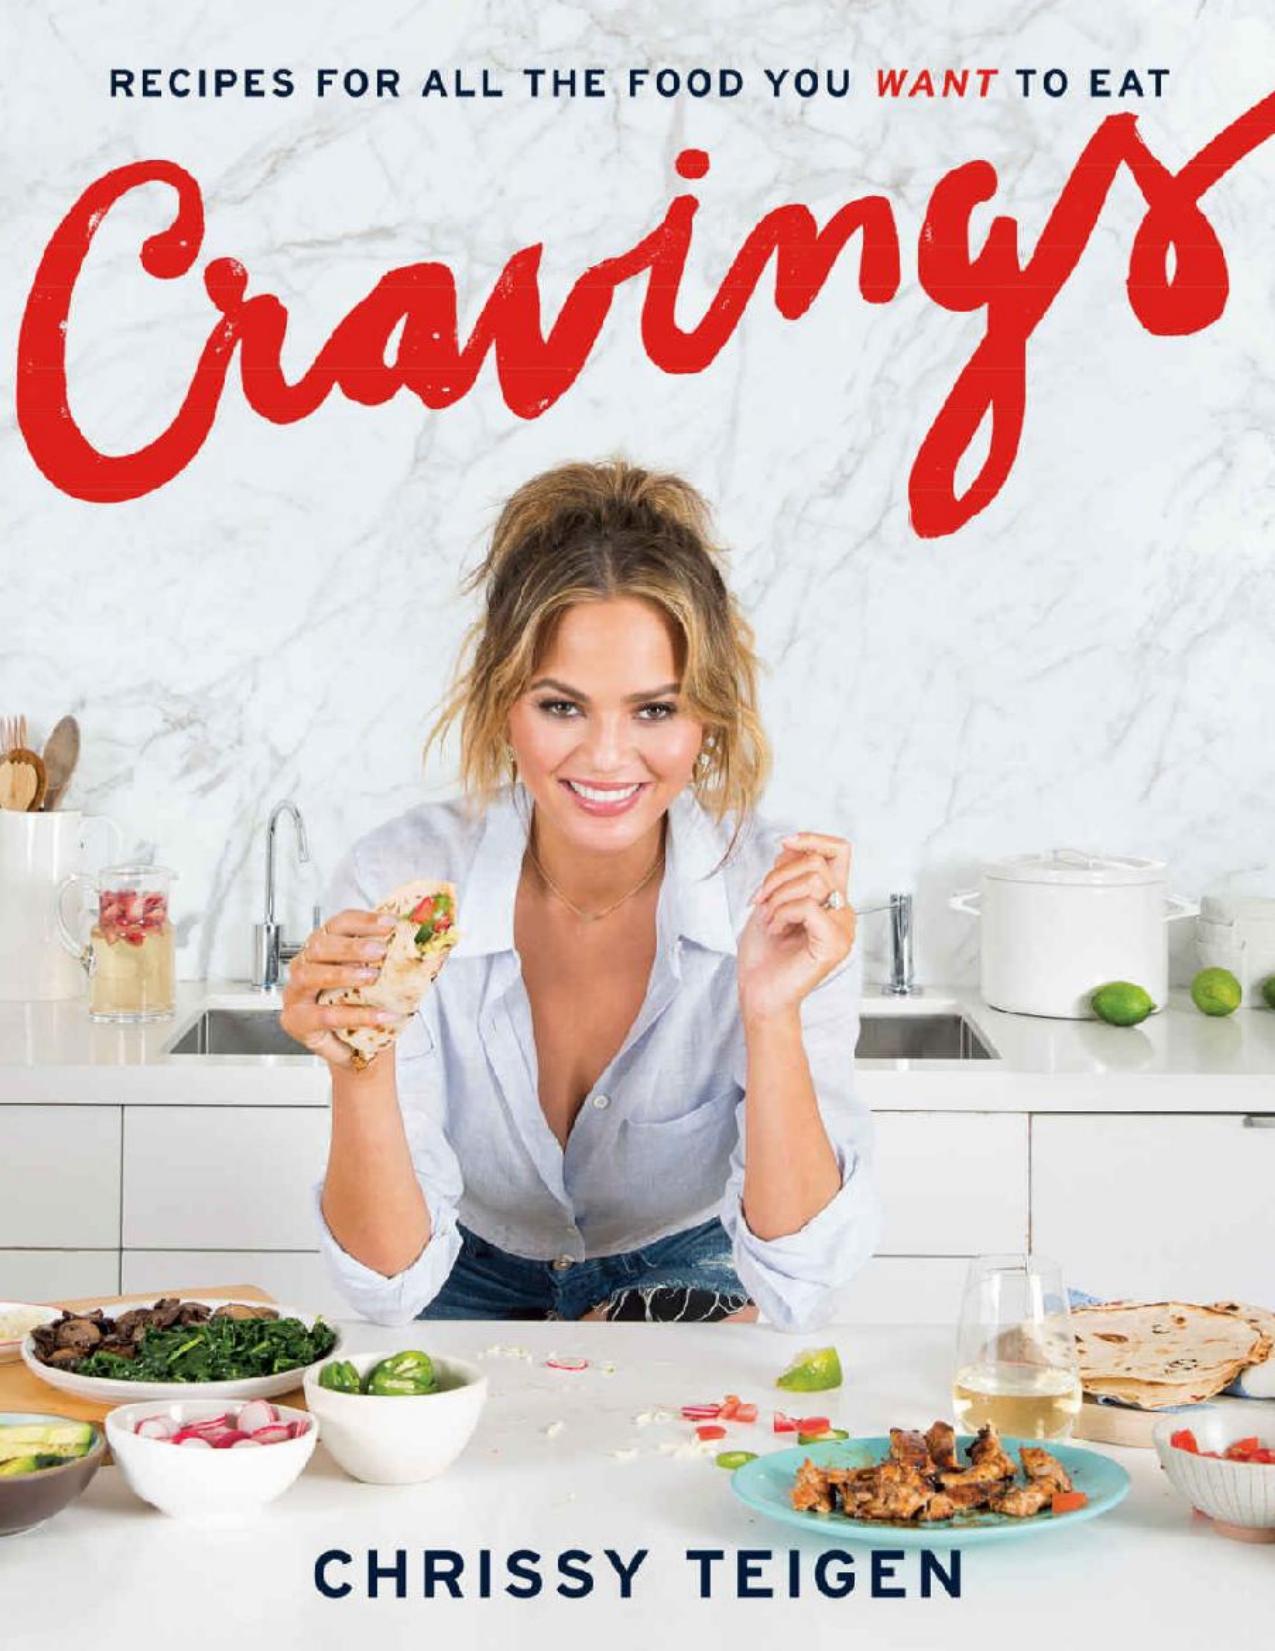 Cravings: Recipes for All the Food You Want to Eat by Chrissy Teigen & Adeena Sussman